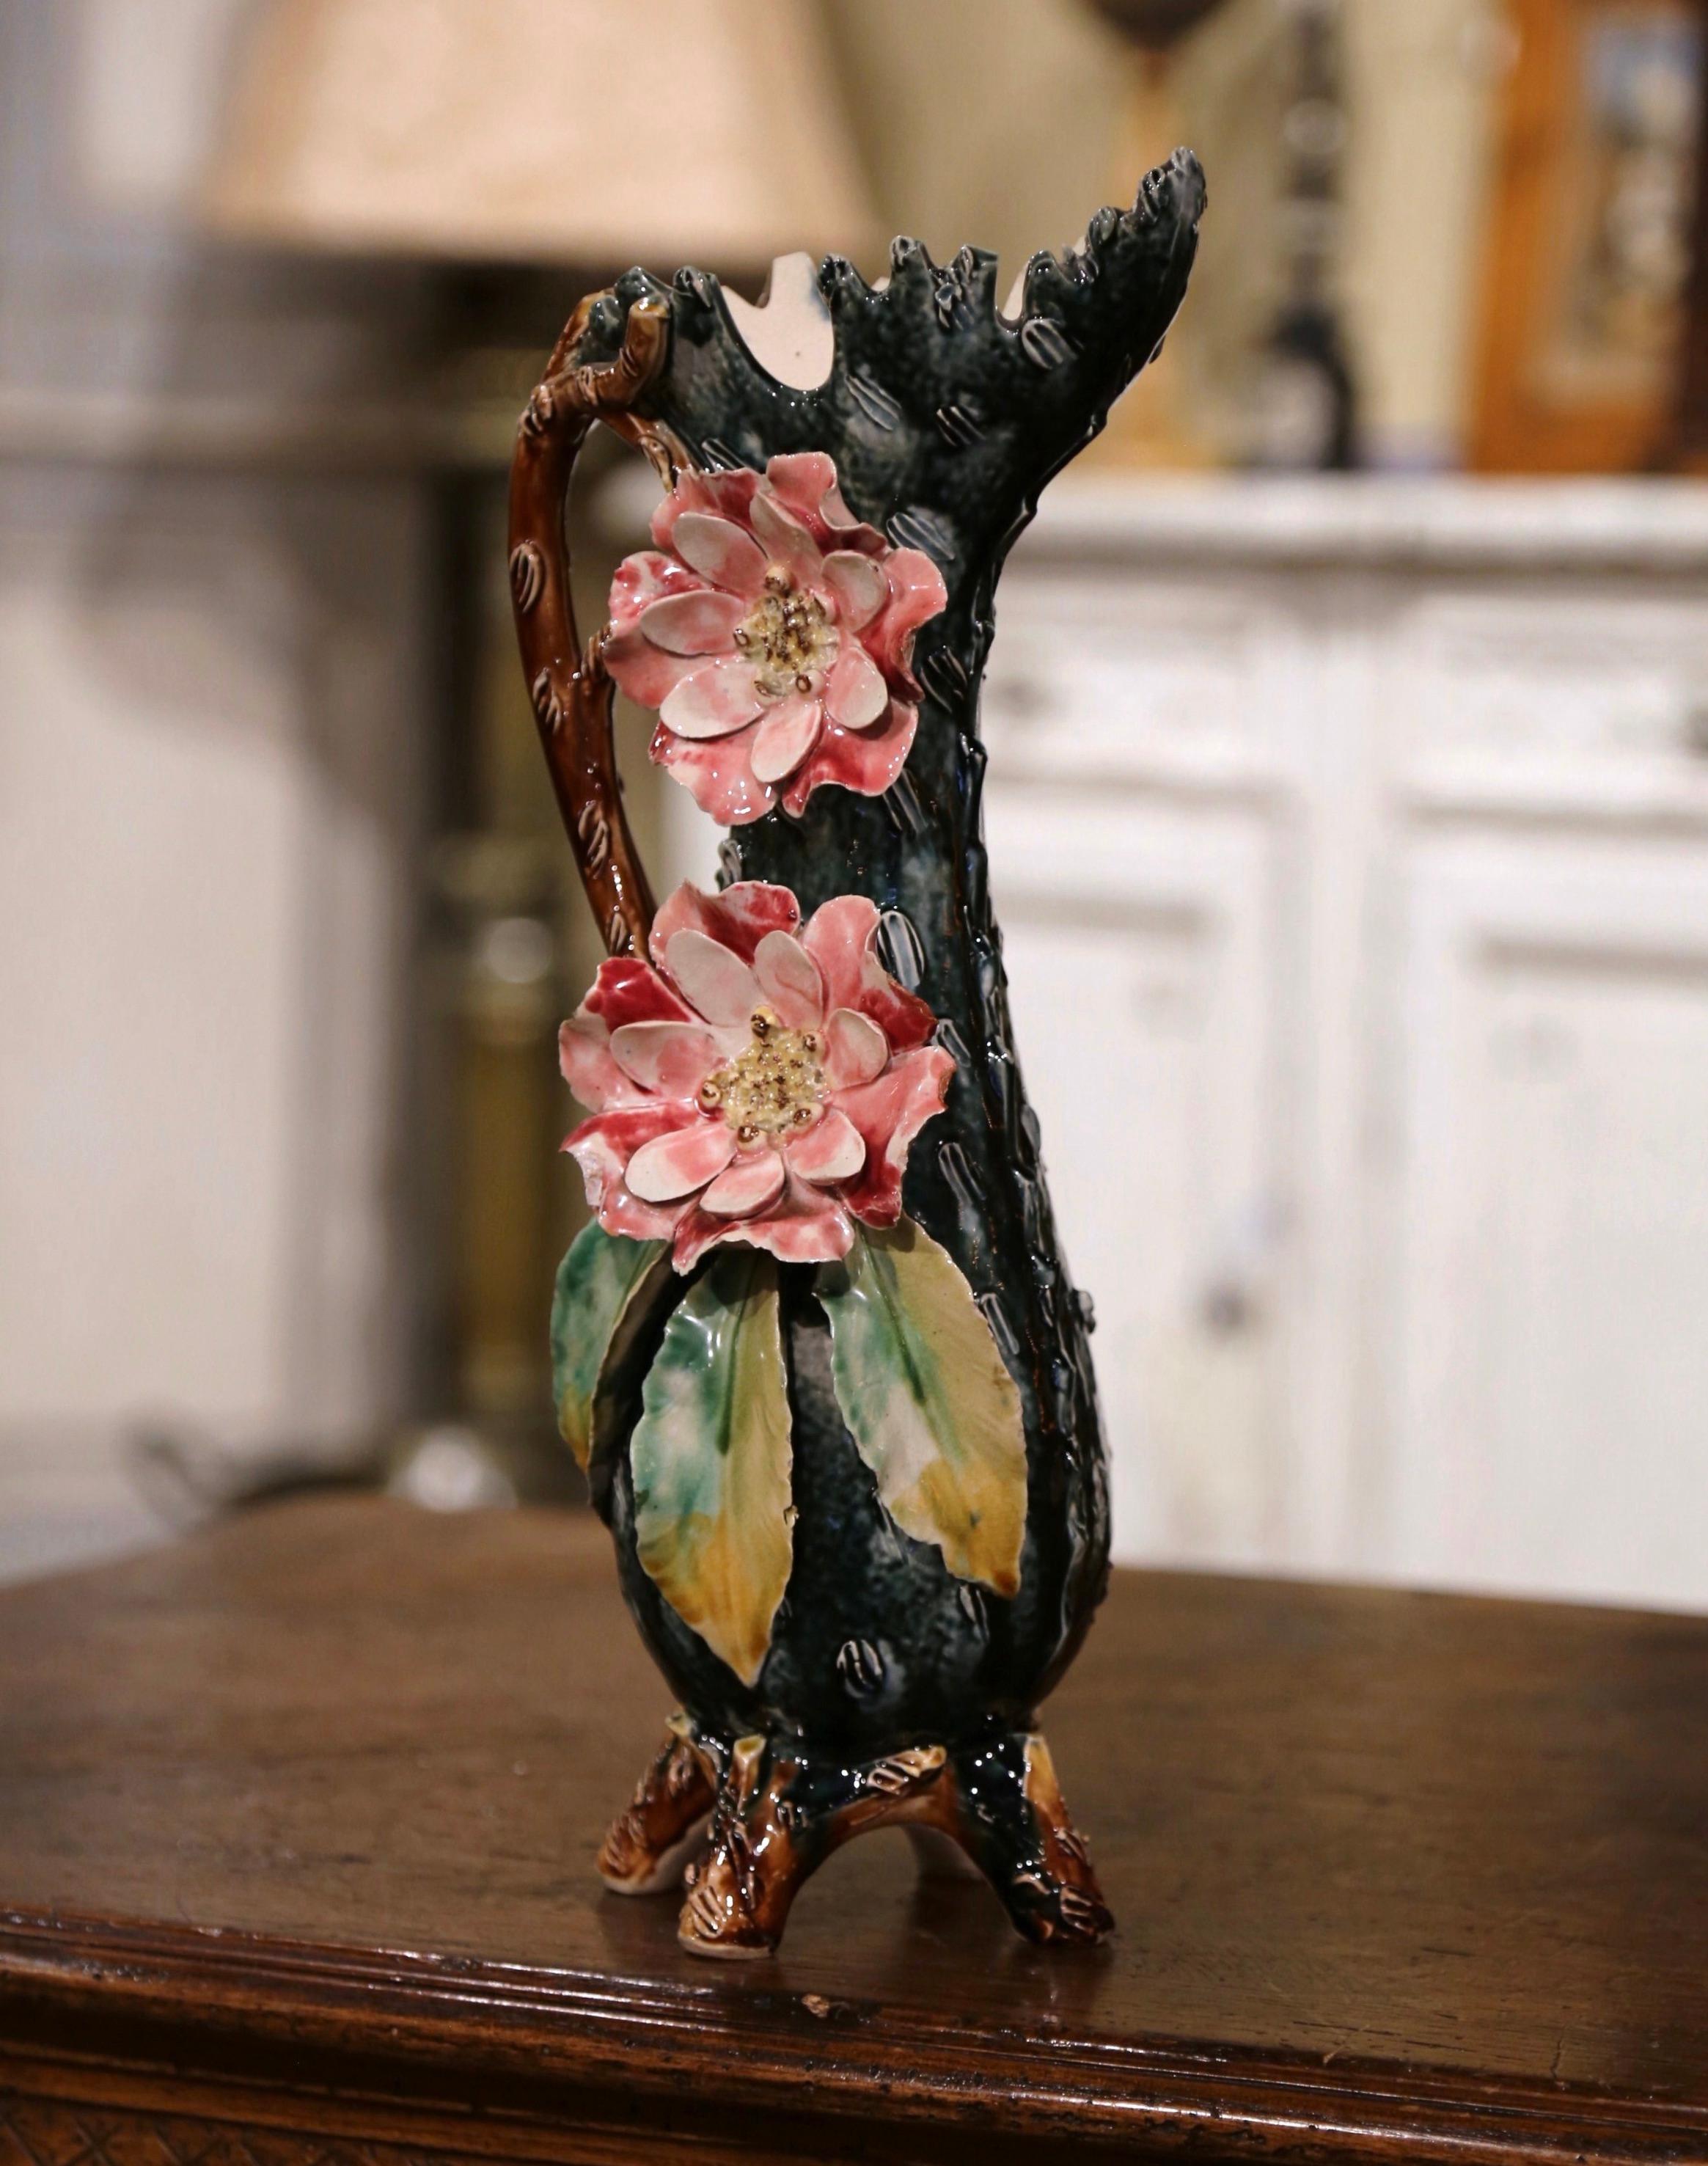 Beautifully sculpted and colorful, this antique Majolica vase would be a wonderful addition to a mantel, tabletop or bookshelf. Crafted in France, circa 1870, this hand-painted piece stands on four curved feet and features a wide and scalloped neck